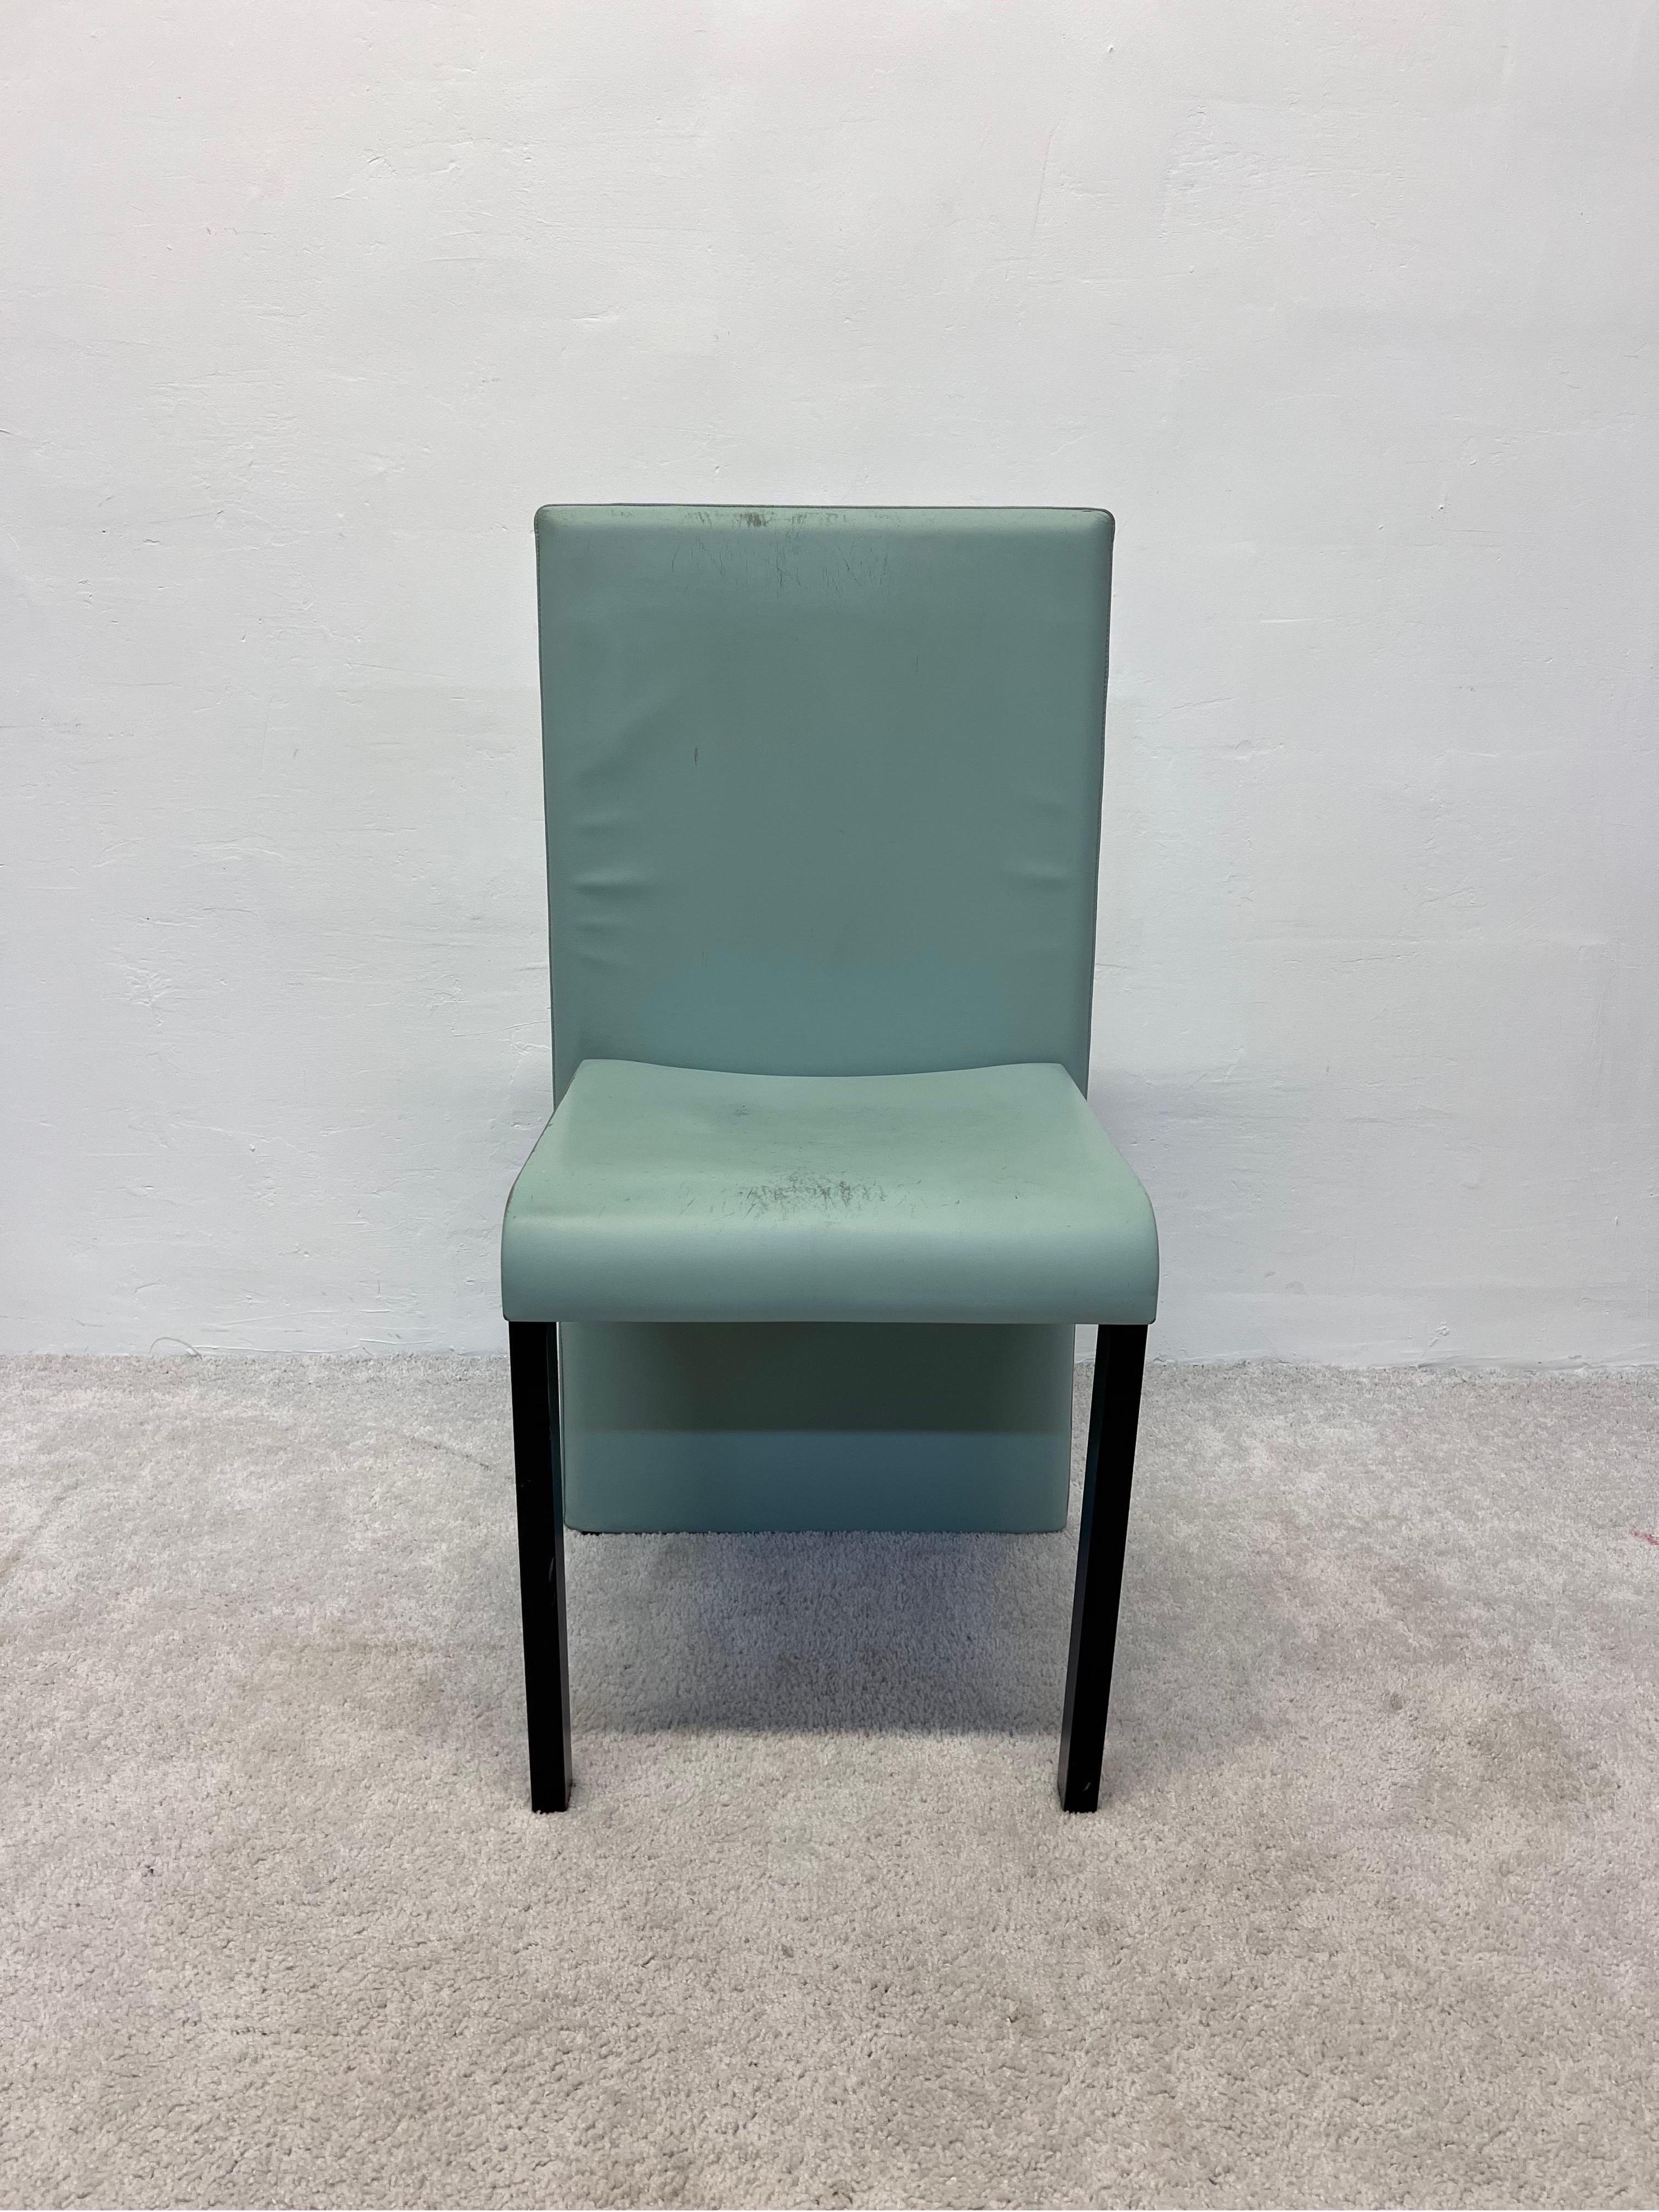 Distressed sea-foam green leather Avio chair designed by Piero Sartogo and Nathalie Grenon for Poltrona Frau, 1998.

The structure of the back of the Avio chair is obtained with harmonic steel bands that guarantee a measured elasticity. The two